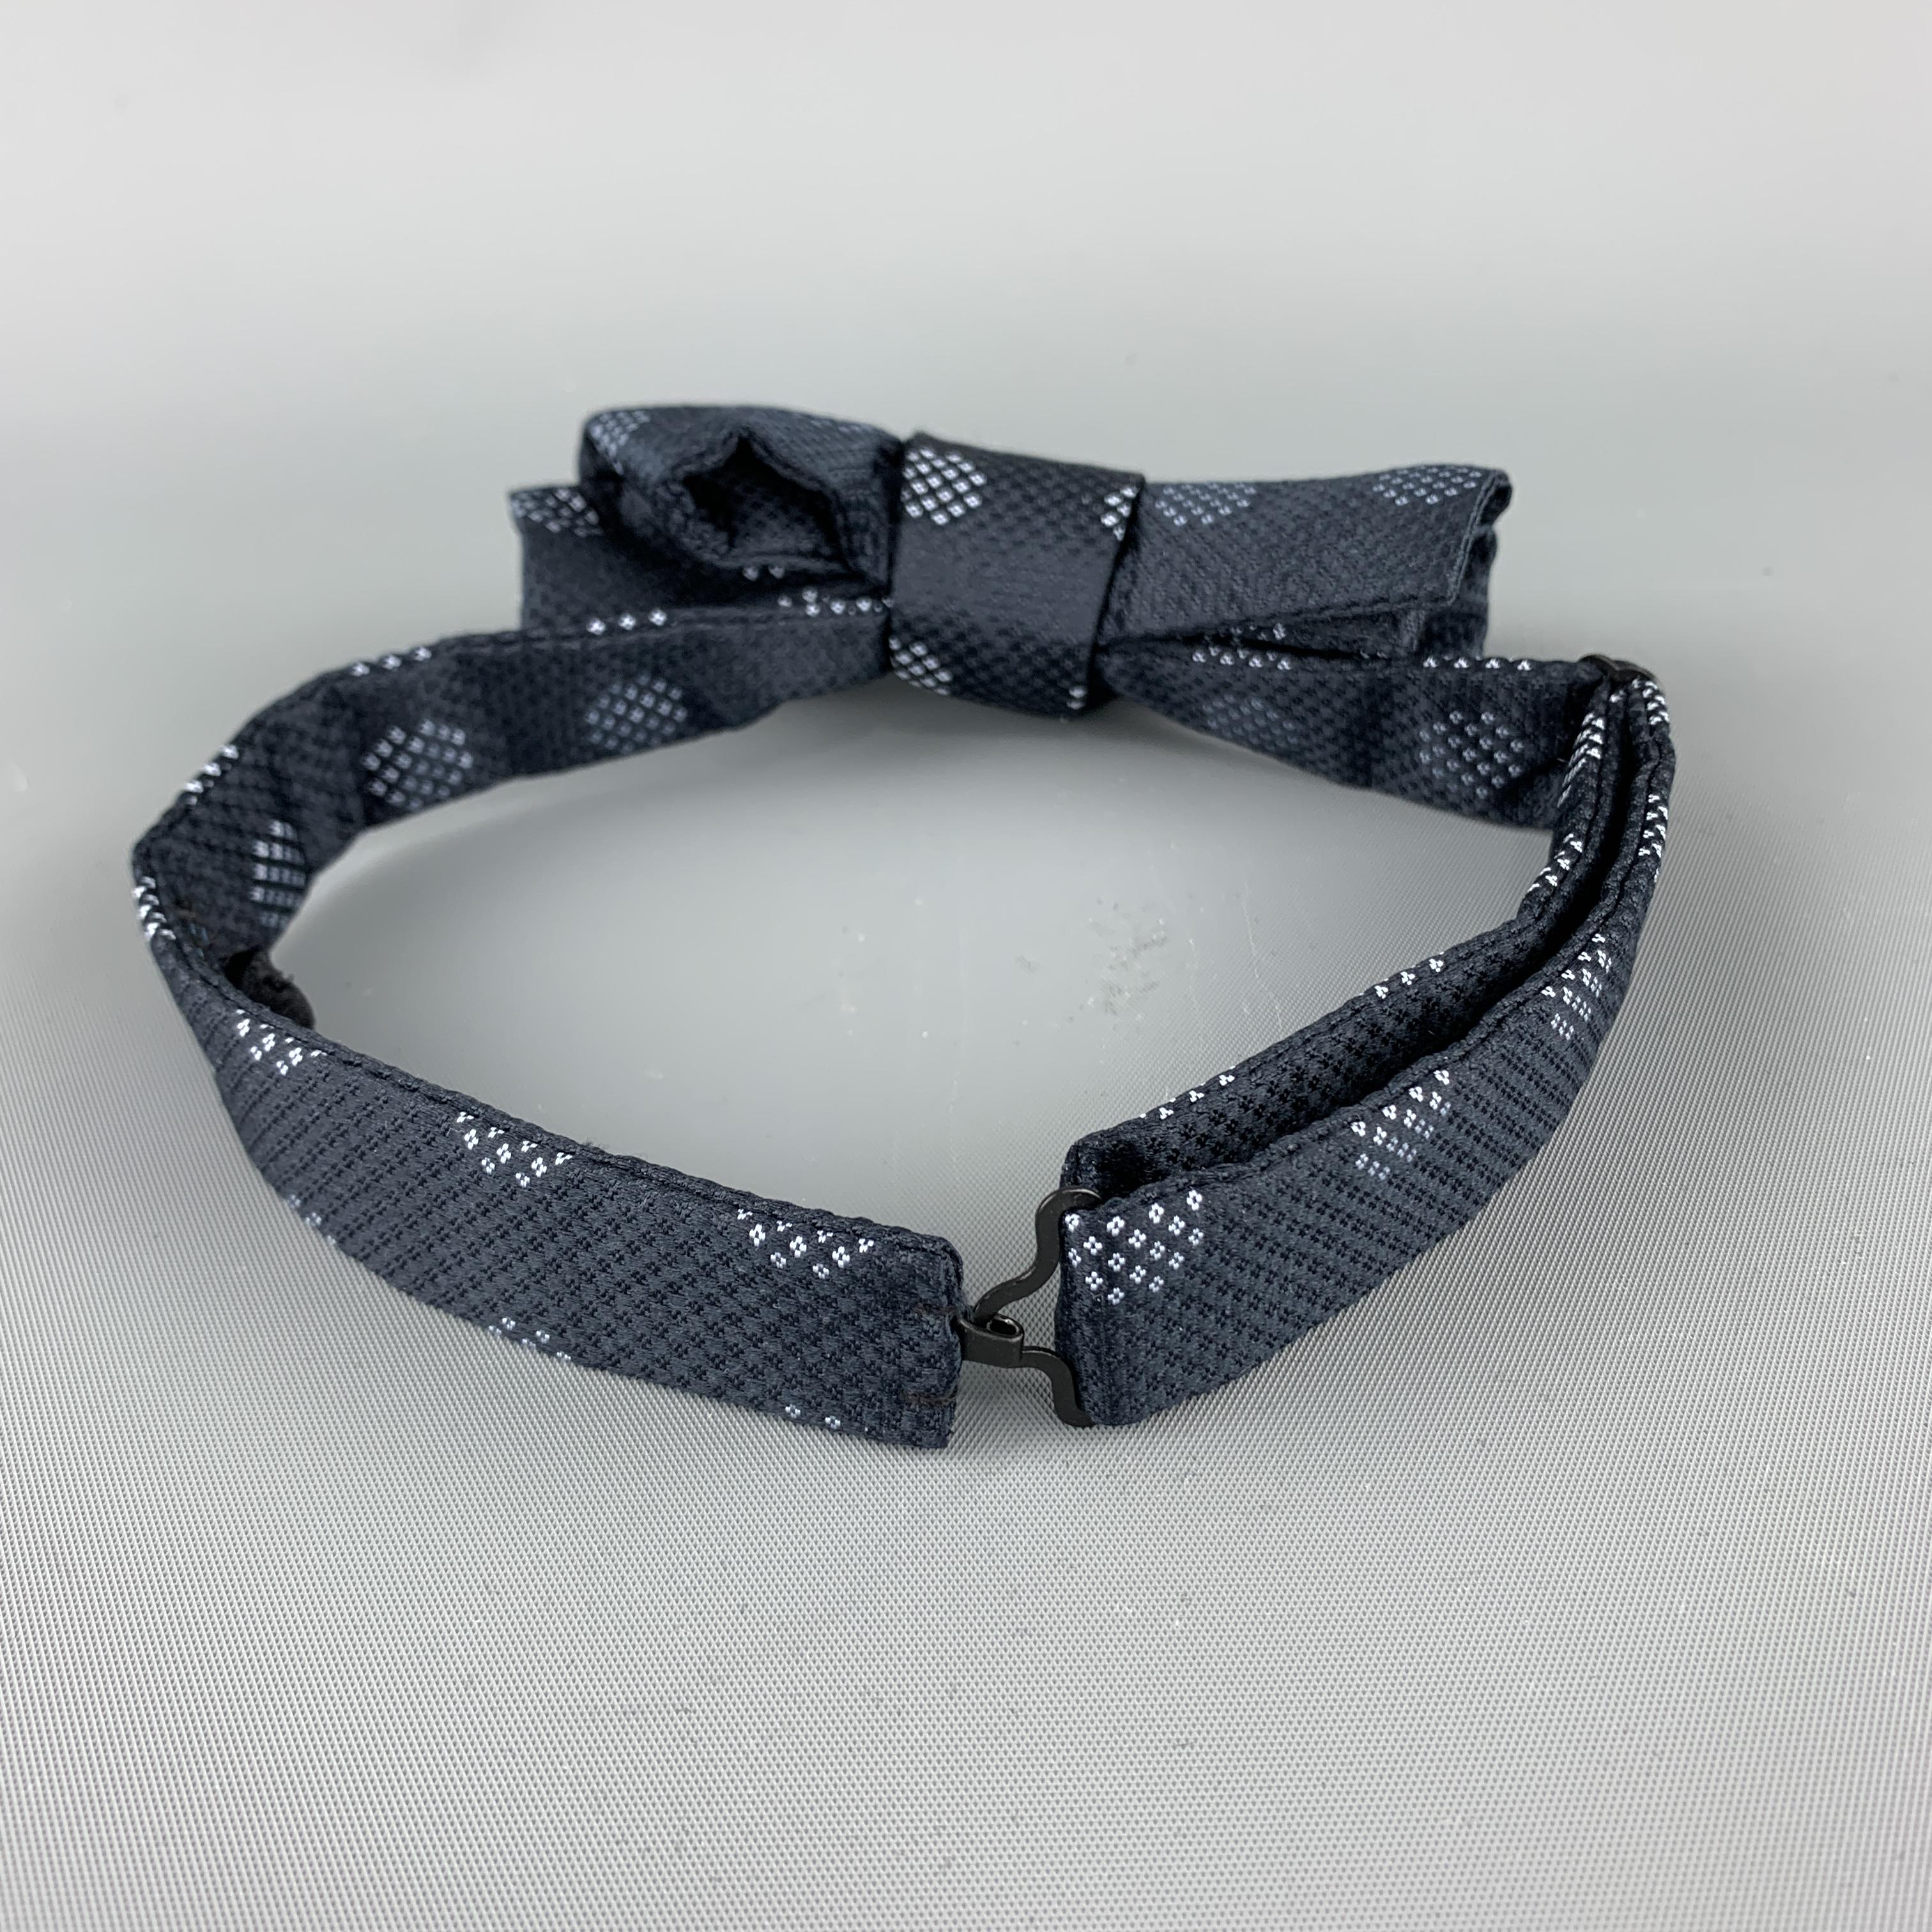 CHARVET bow tie comes in navy and white spot print silk with an adjustable neck. Made in France.

Excellent Pre-Owned Condition.

Original Retail Price: $250.00